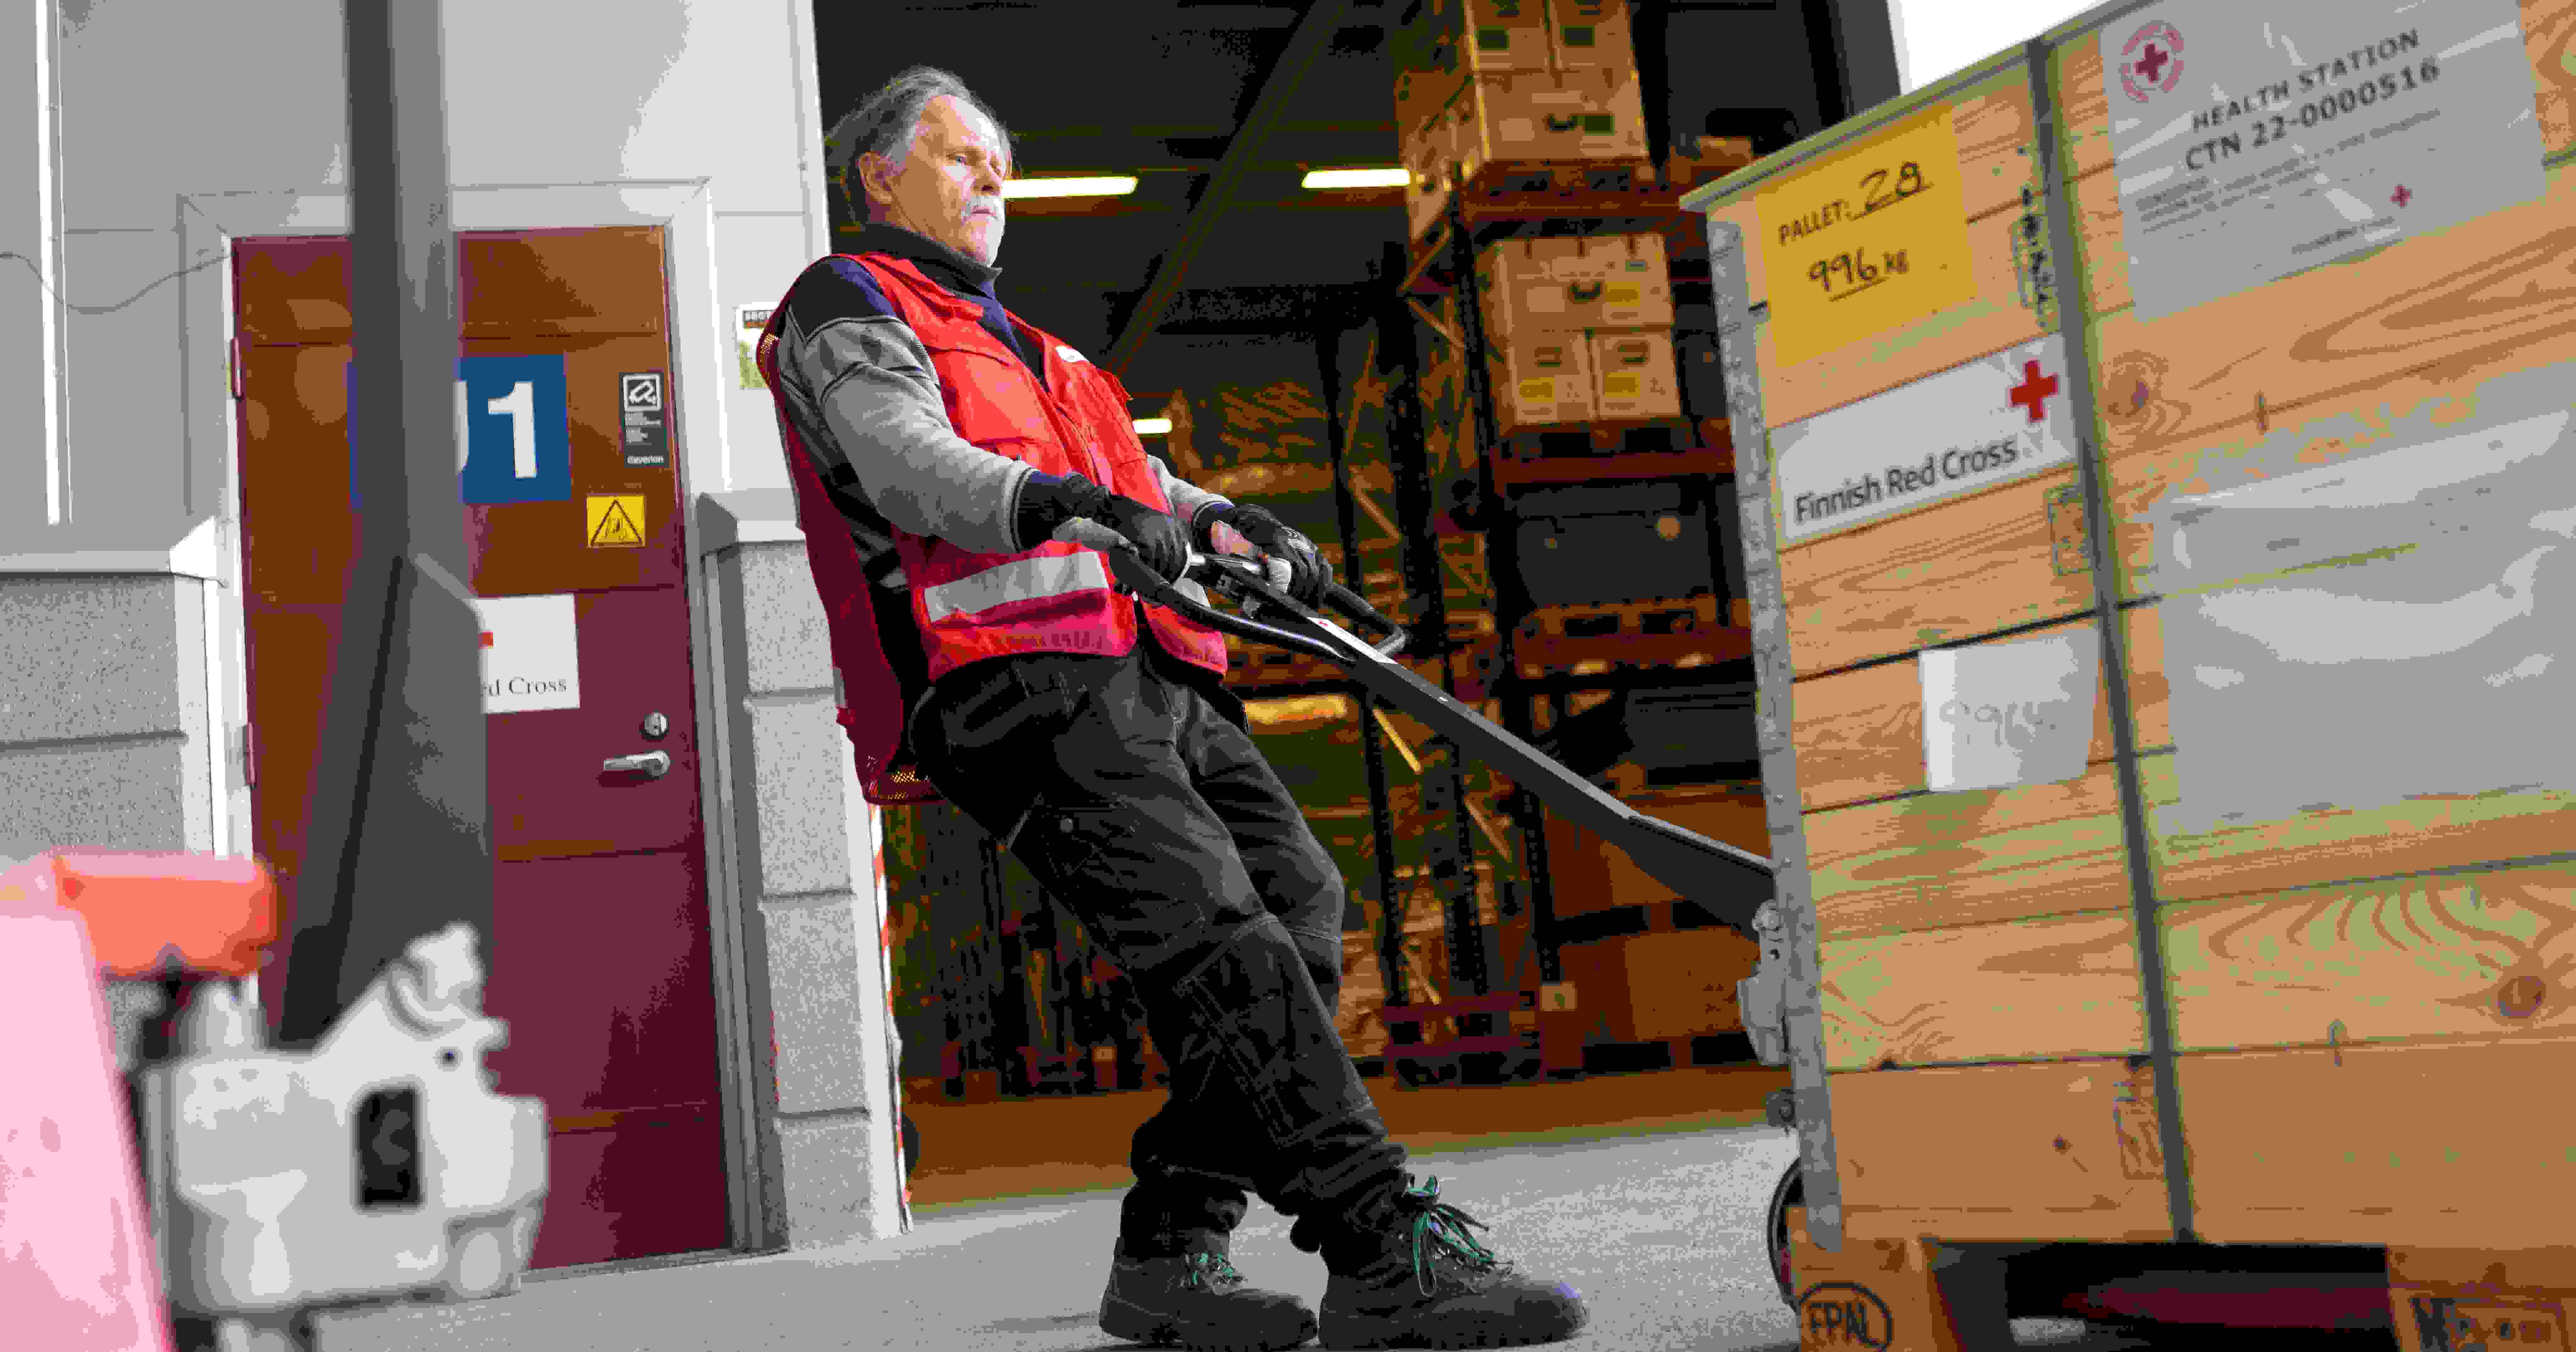 Red Cross employee moving a load with a pallet jack. The boxes read "Health station".